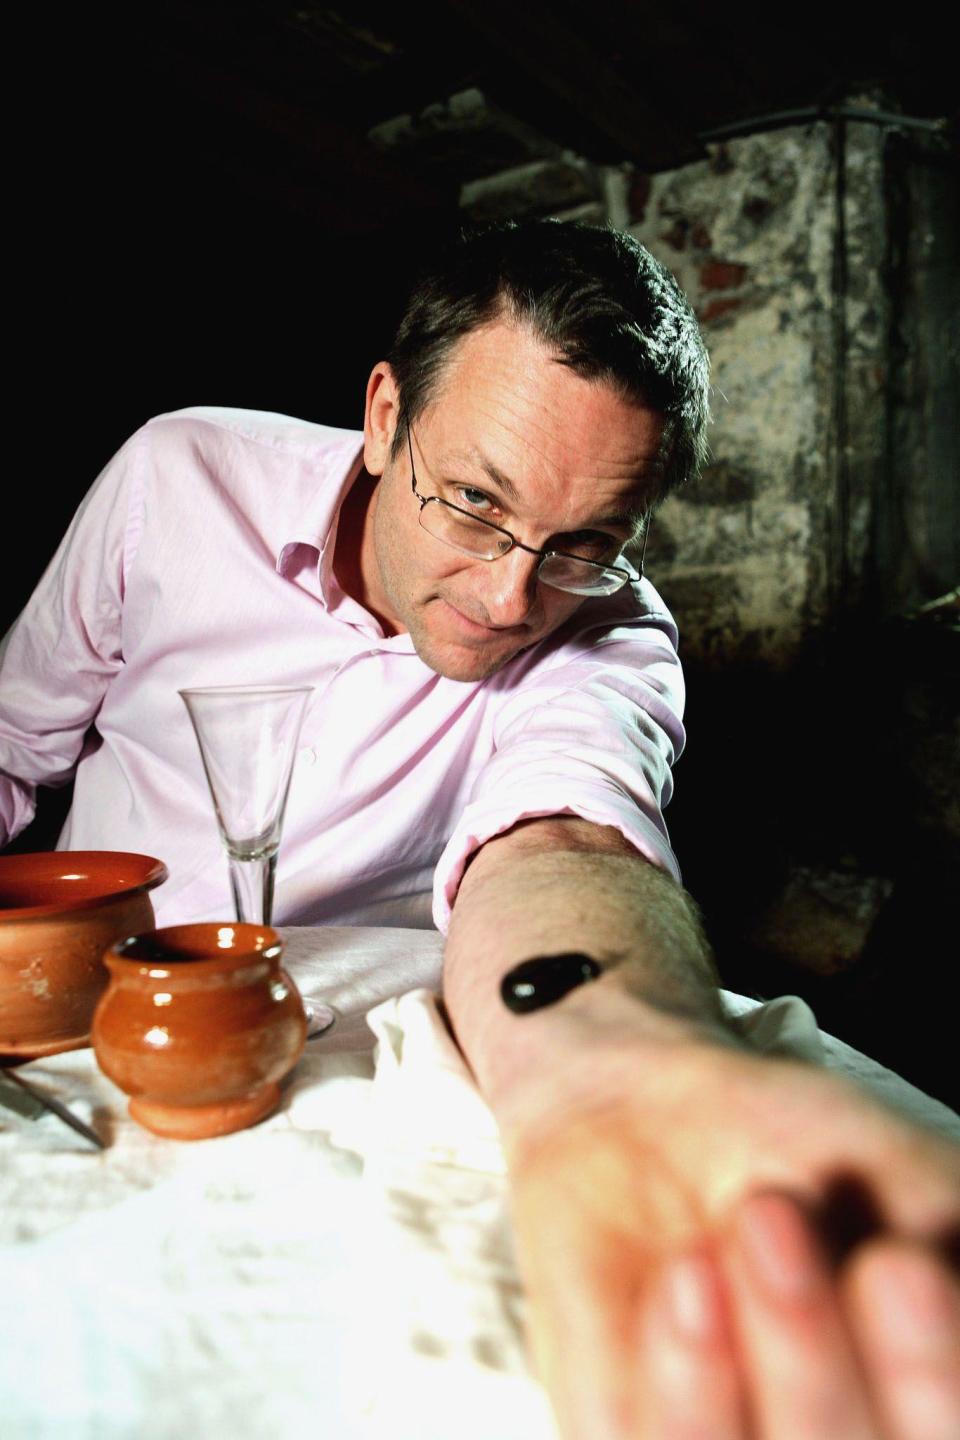 Michael Mosley posing with a blood sucking leech on his arm